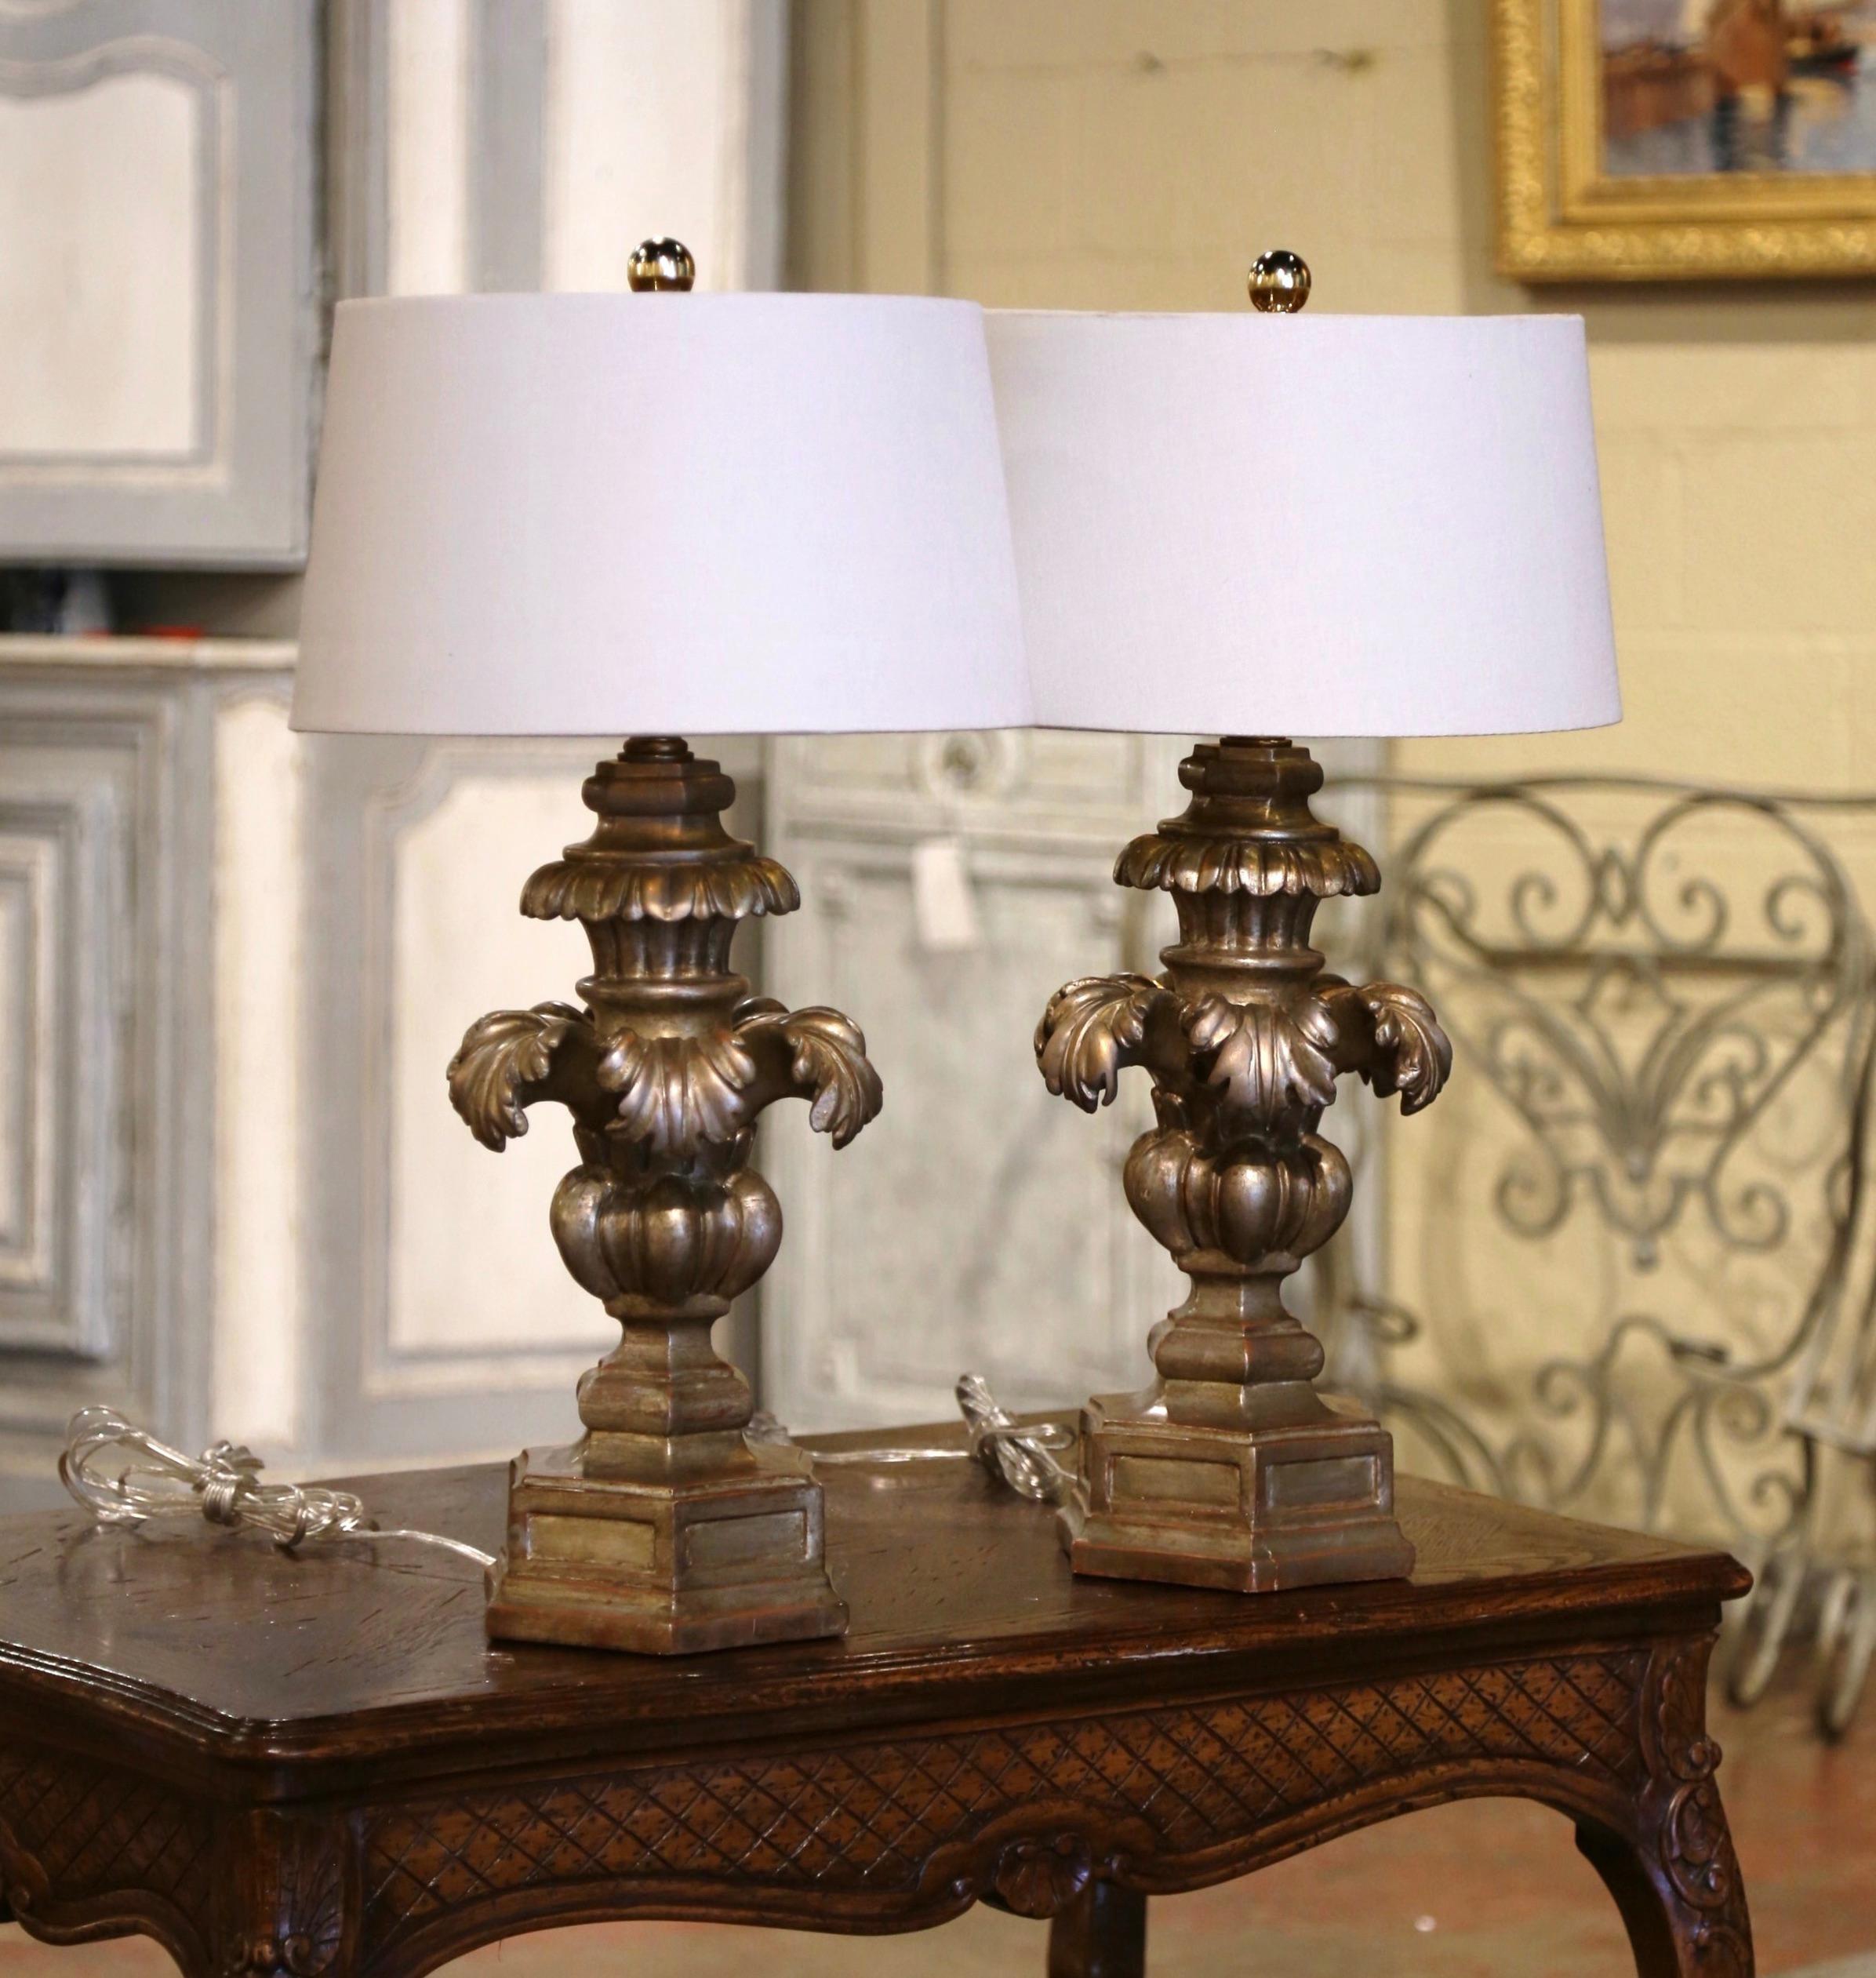 Place these elegant antique lamps on bedside tables or on top of a console in an entry! Crafted in Italy circa 1970, each lamp sits on a polygon bottom over an urn form base, decorated with hand carved acanthus leaf motifs throughout. Both lamps